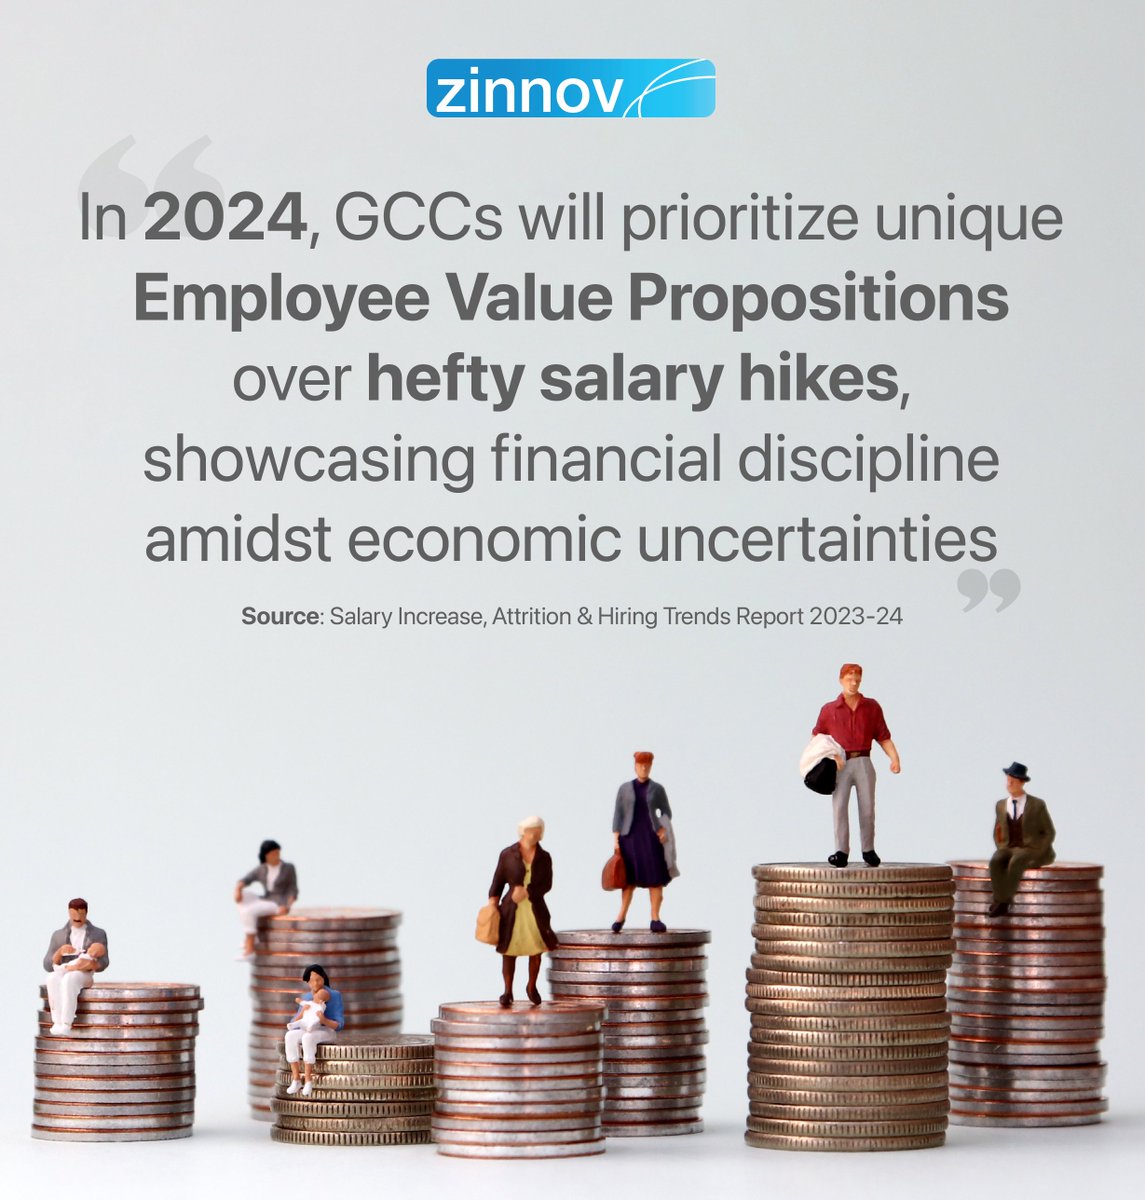 Our latest report examines the 2024 data around #salary increases, #attrition triggers, and evolving #hiring dynamics shaping India's vital #GCC space this year: bit.ly/3RuSxtI.

#TalentTrends #Hiring #Attrition #SalaryIncrease #TalentStrategy #GCCs #Talent #India